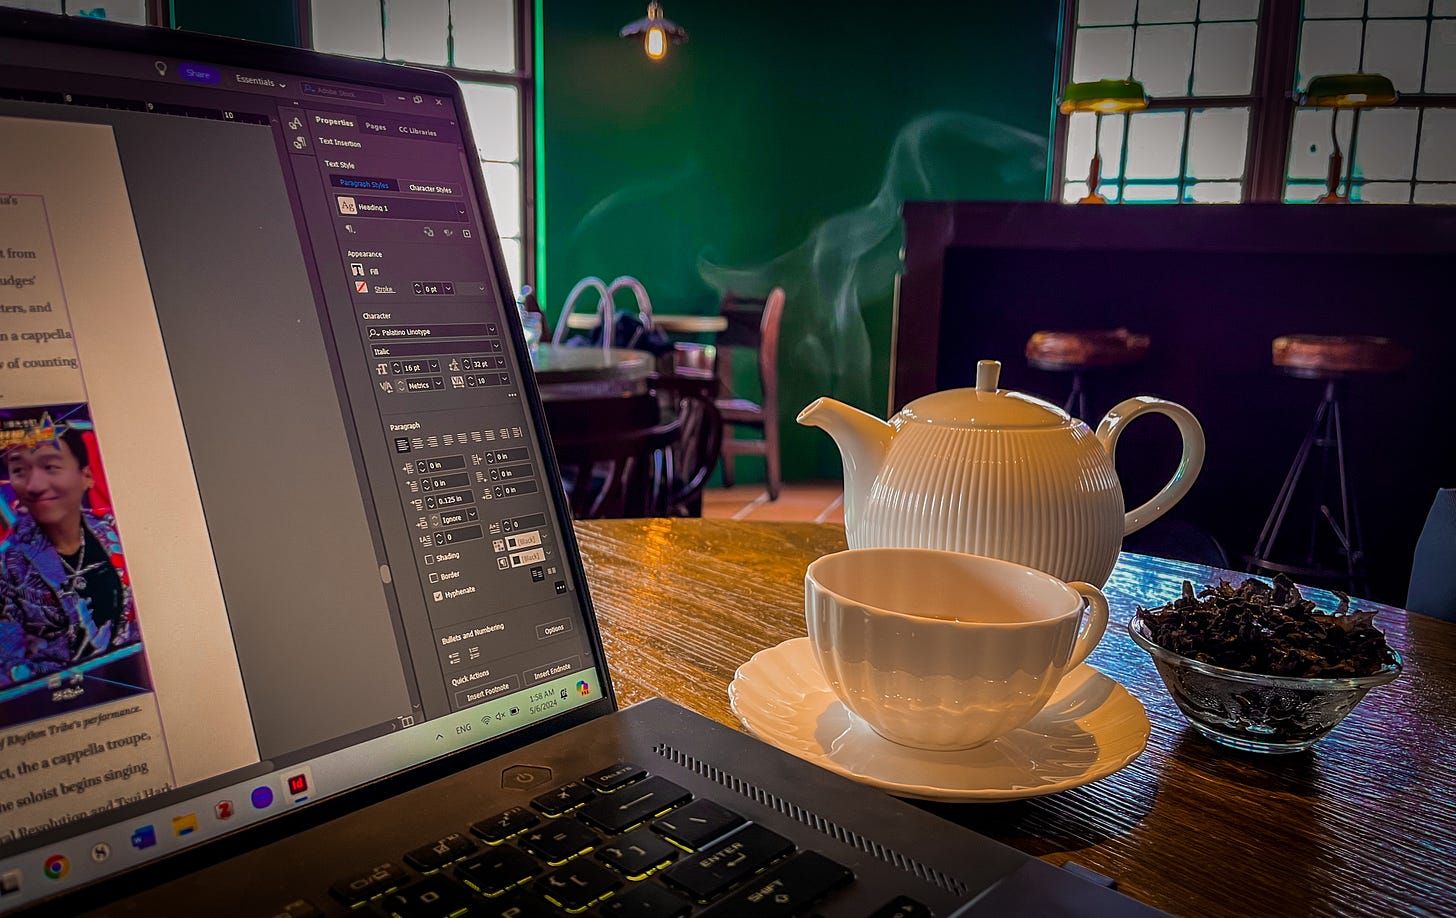 Steam rises over a white ceramic teacup sitting between an open computer, a teapot, and a glass bowl of tea leaves in Taipei's Dadaocheng